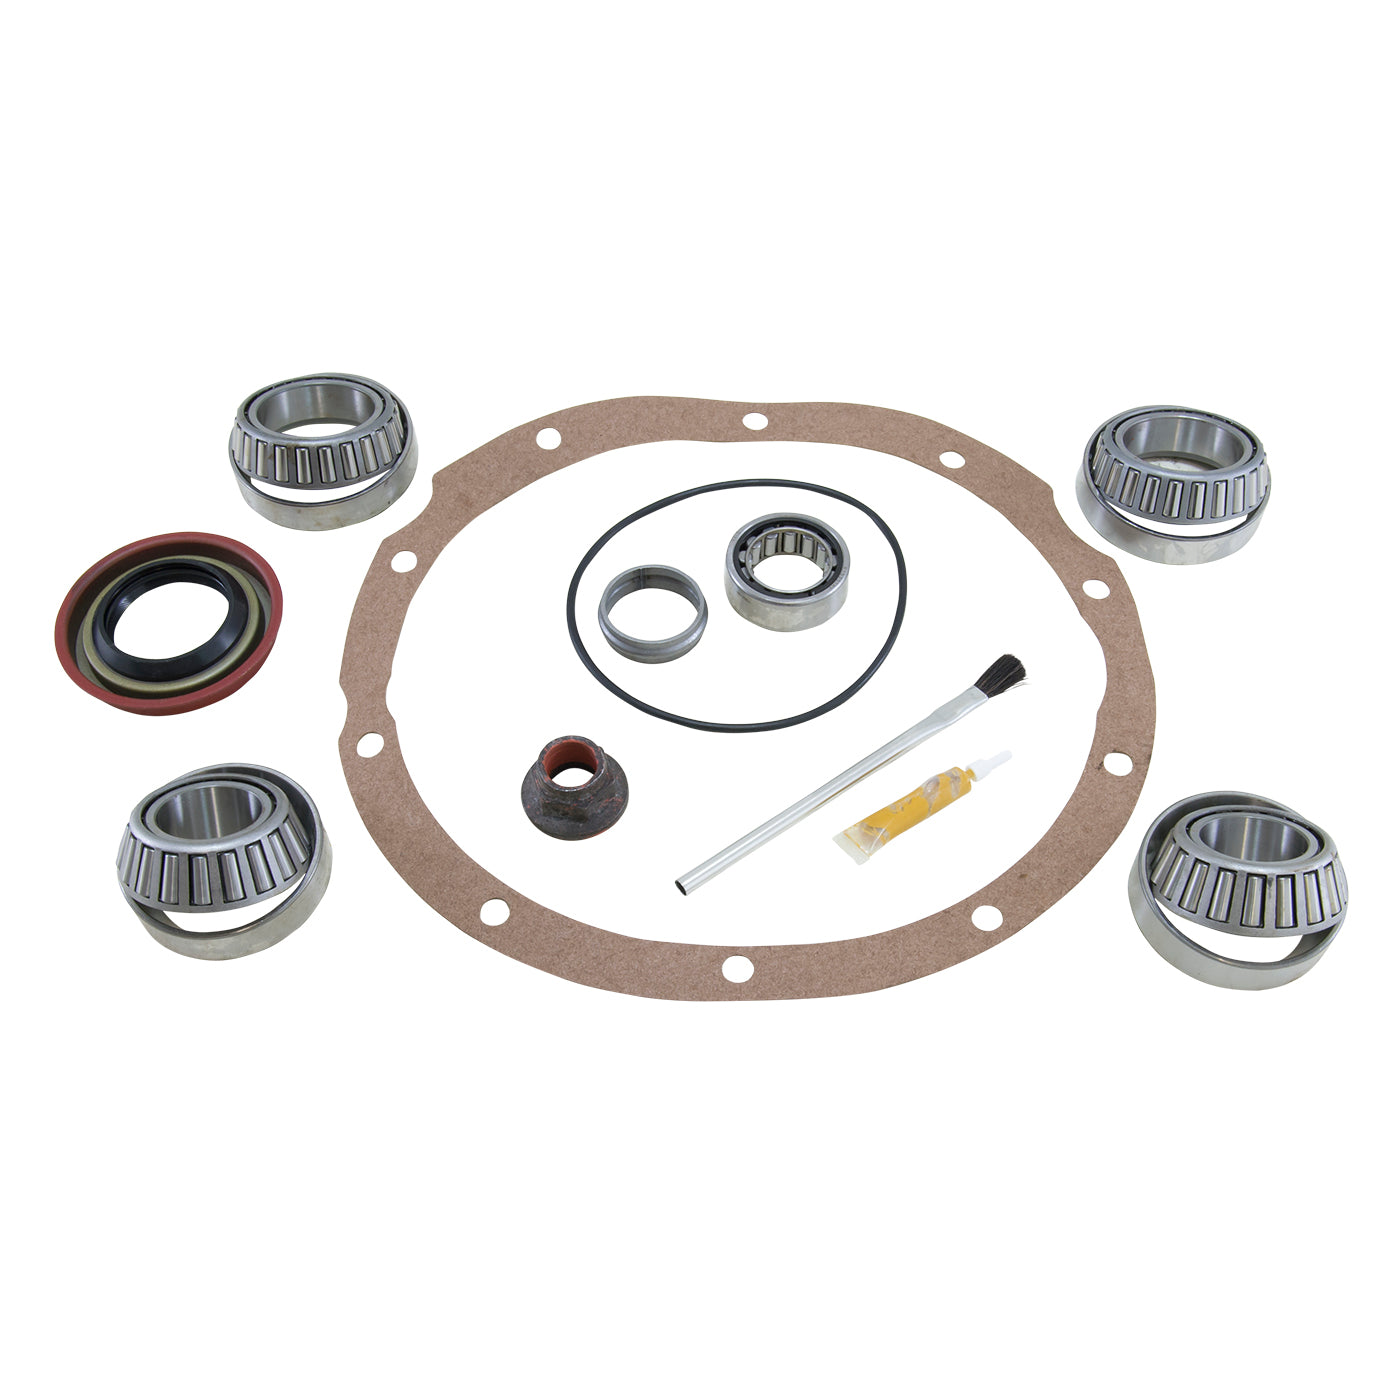 Yukon Gear Bearing install kit for Ford 9" differential, LM104911 bearings BK F9-A